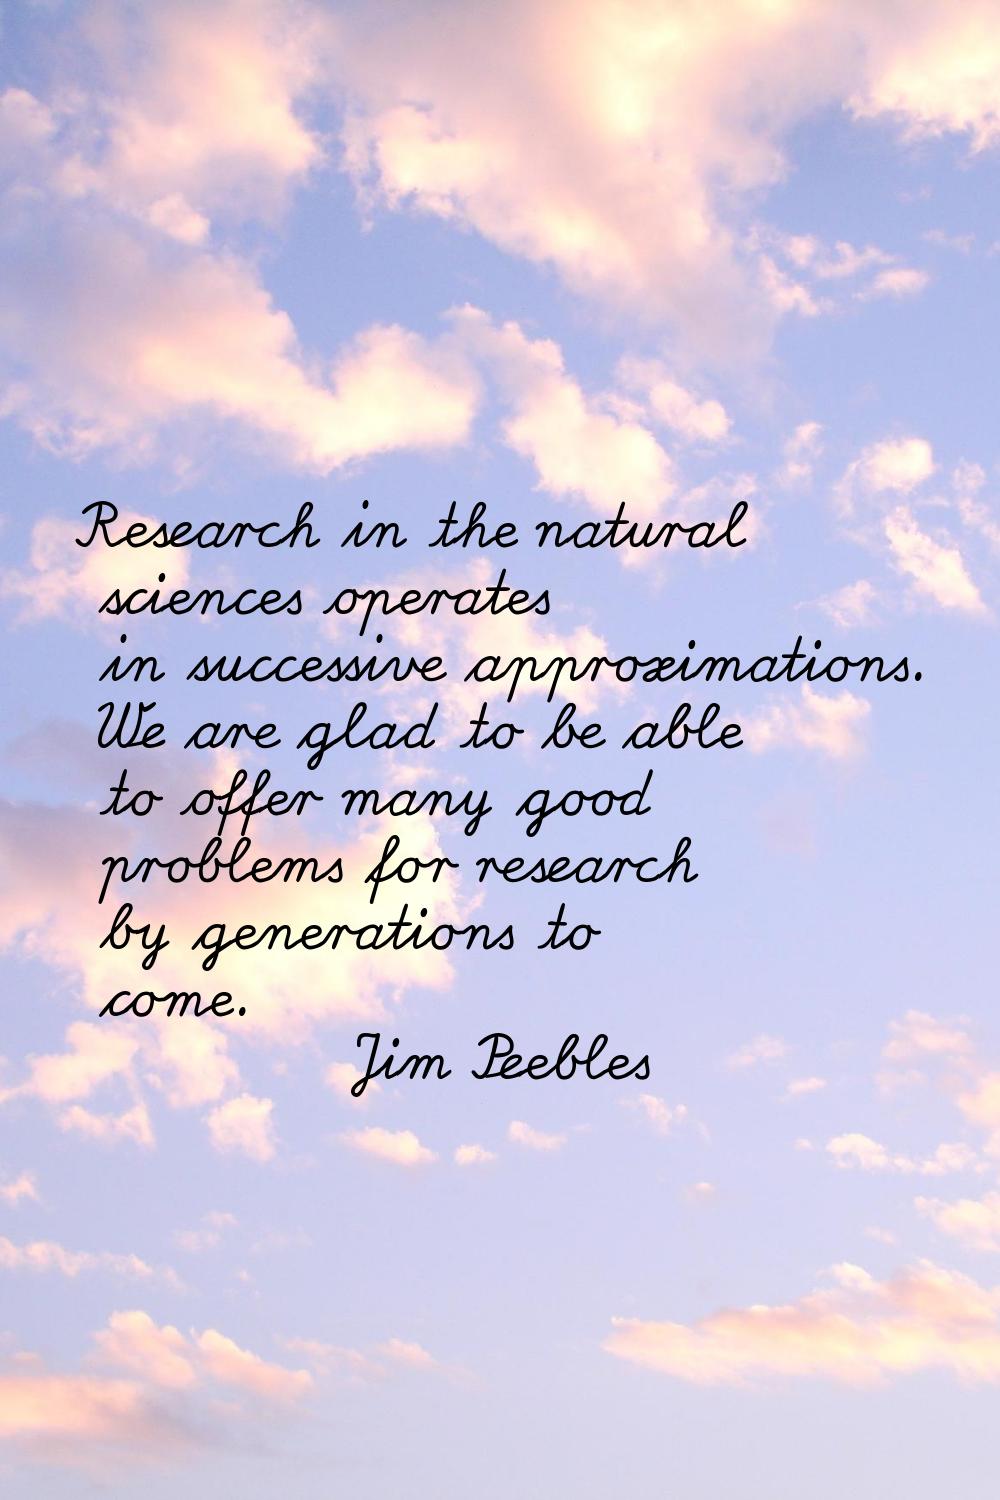 Research in the natural sciences operates in successive approximations. We are glad to be able to o